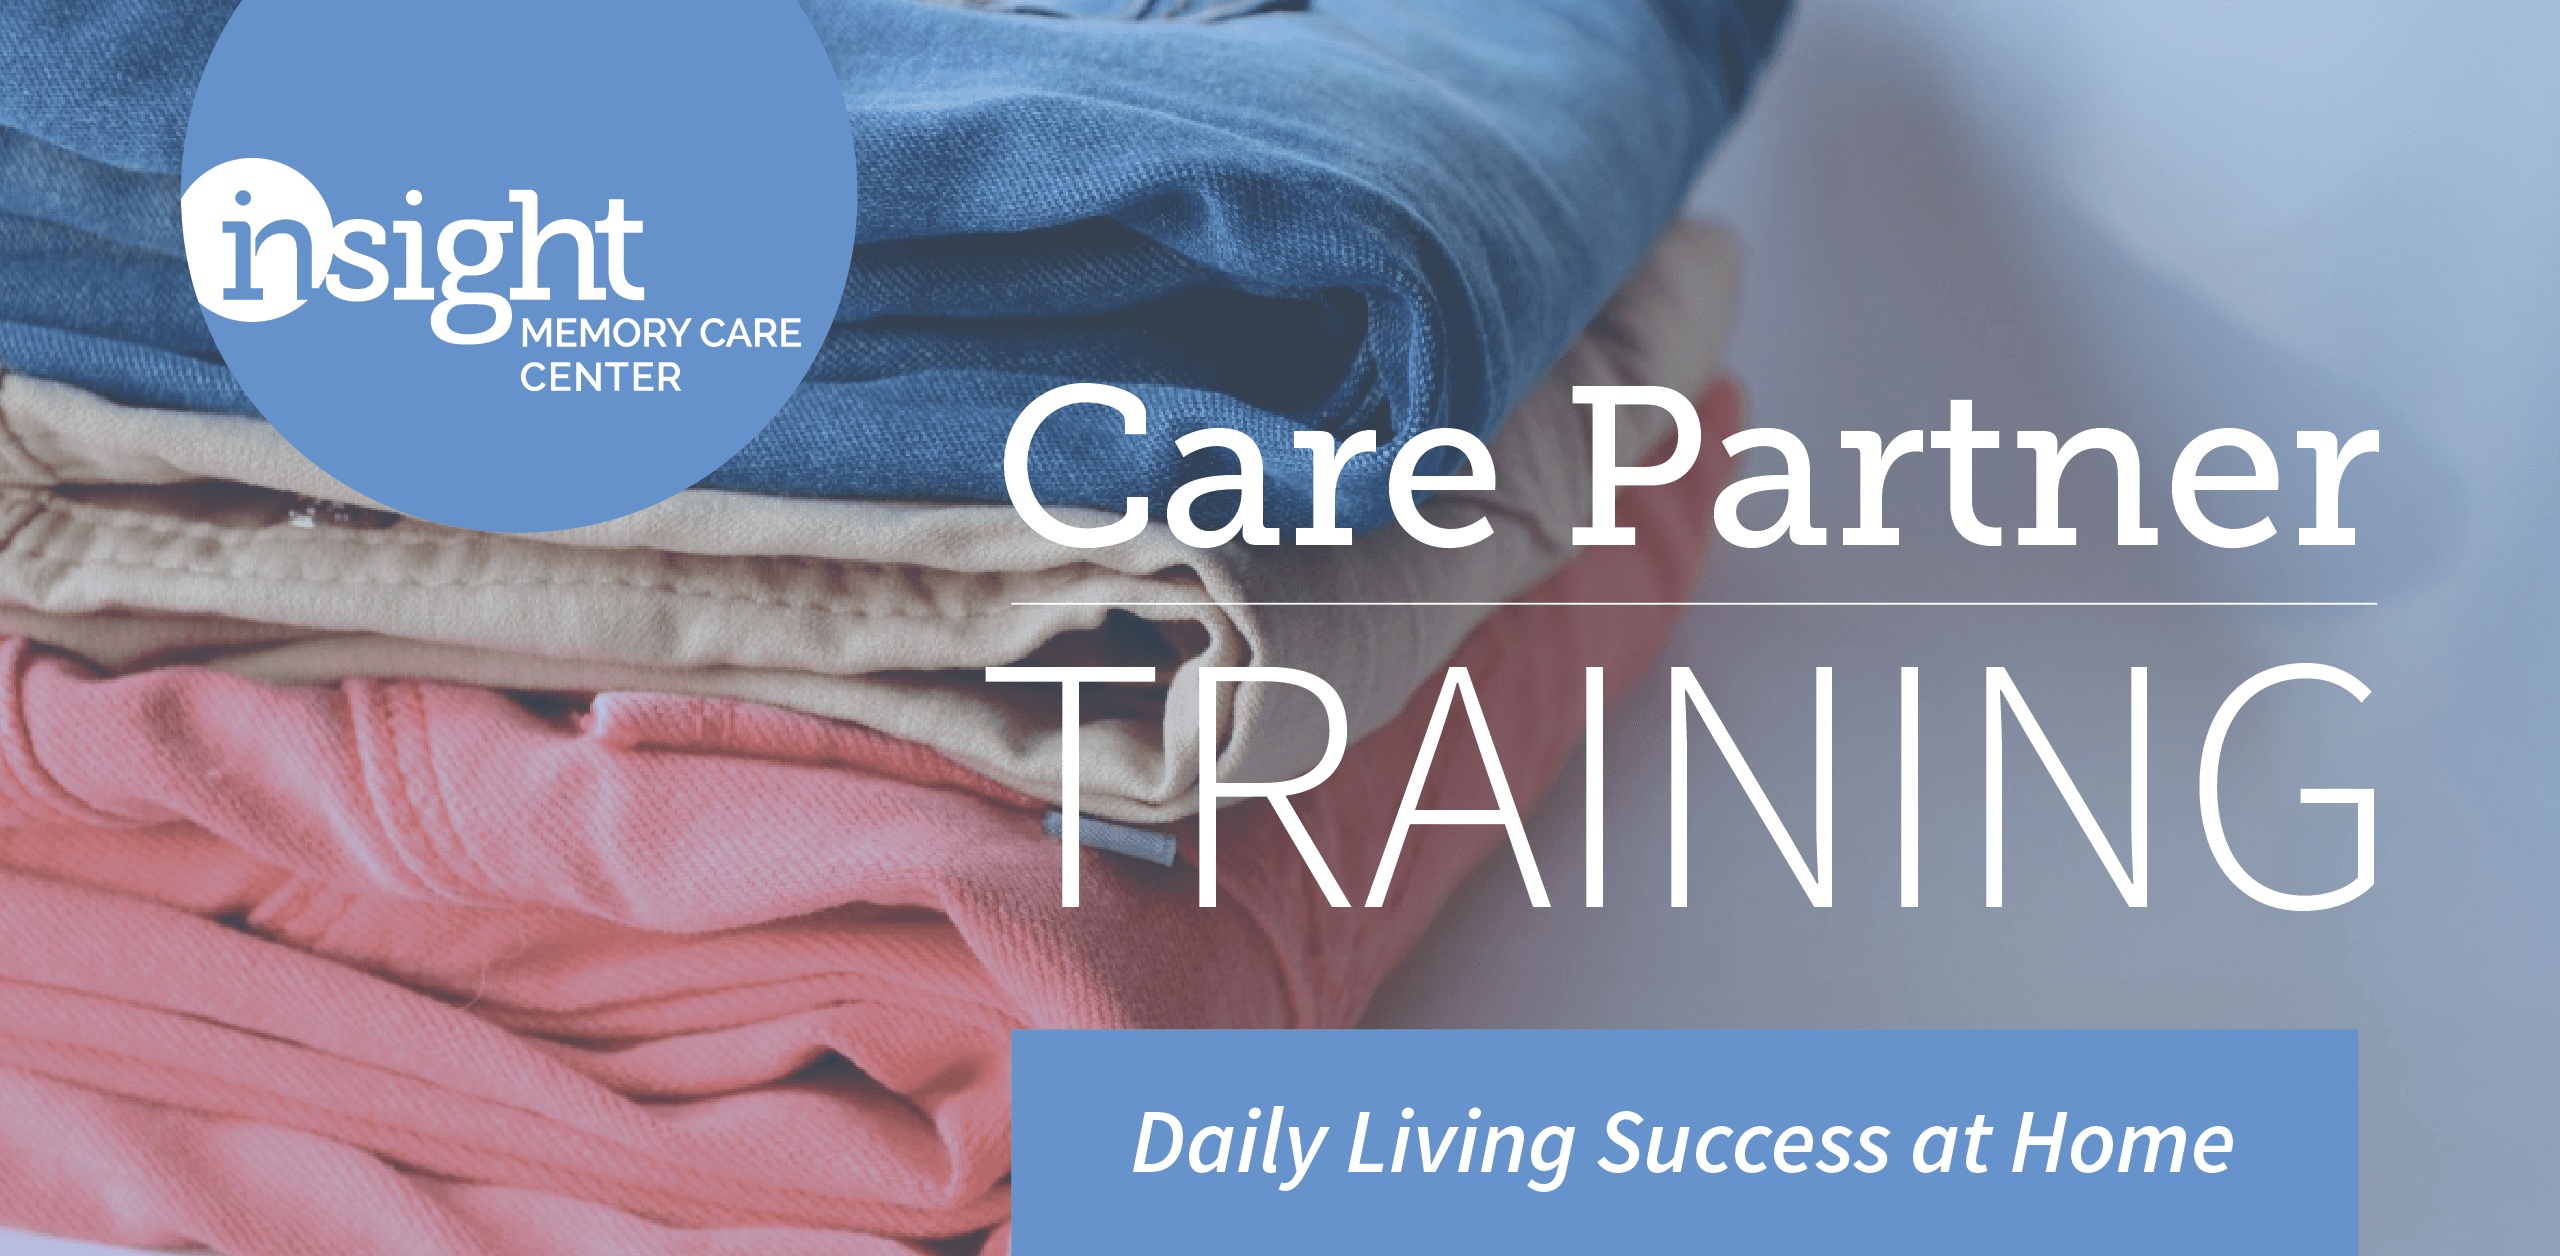 Tips for Daily Living Success at Home